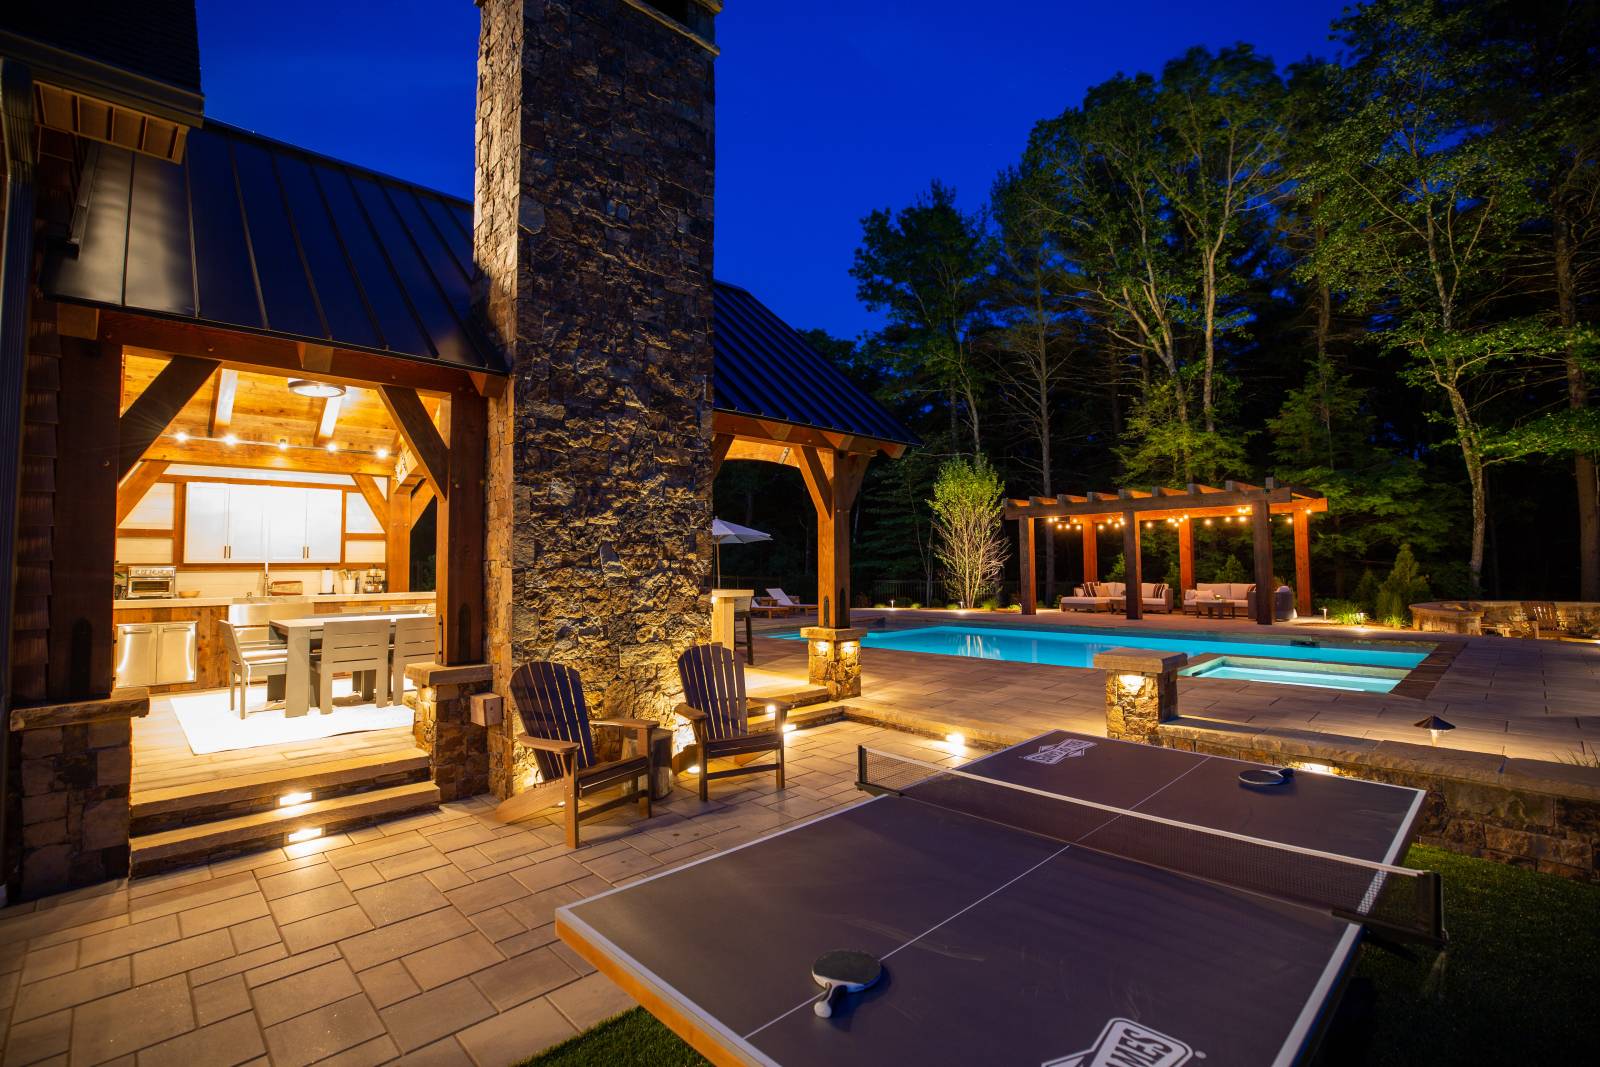 Table Games Next To the Pavilion • Farther Back, The Pool and a Timber Frame Pergola